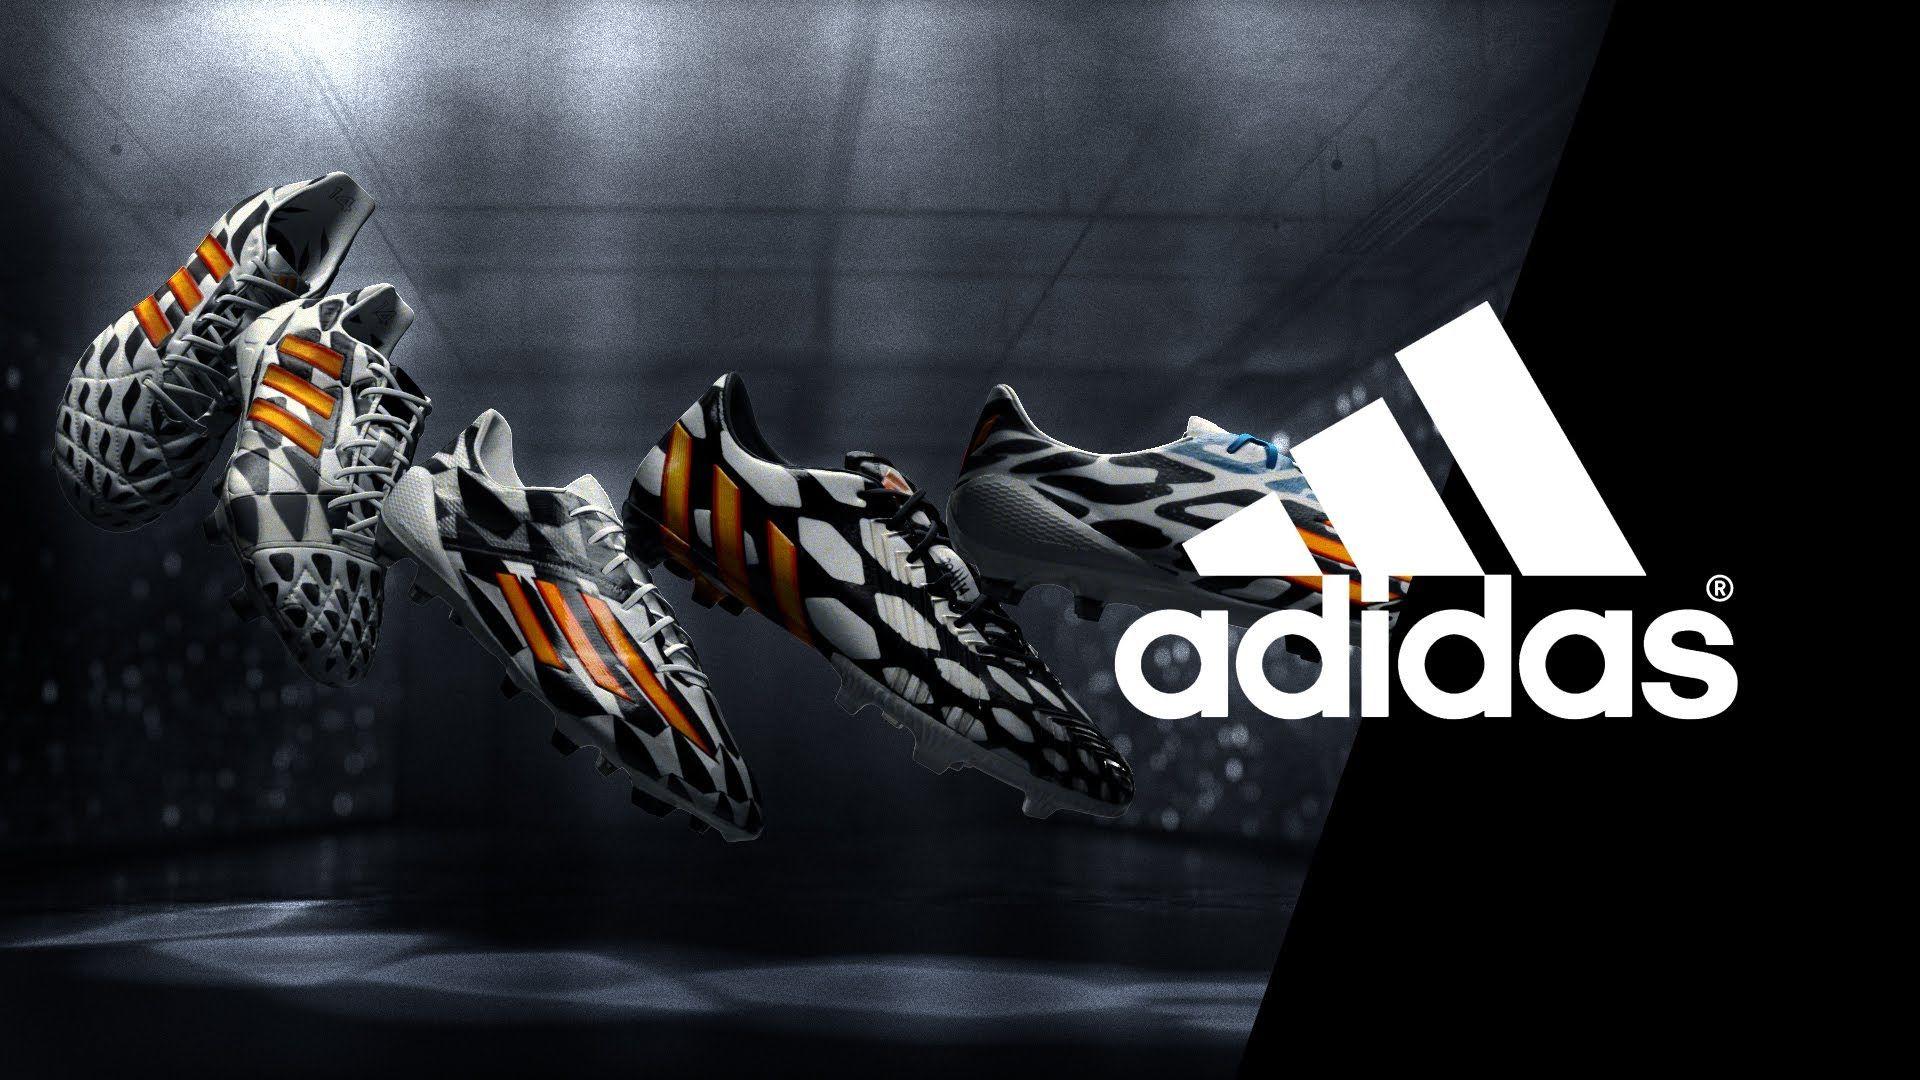 Introducing the Battle Pack - adidas Football